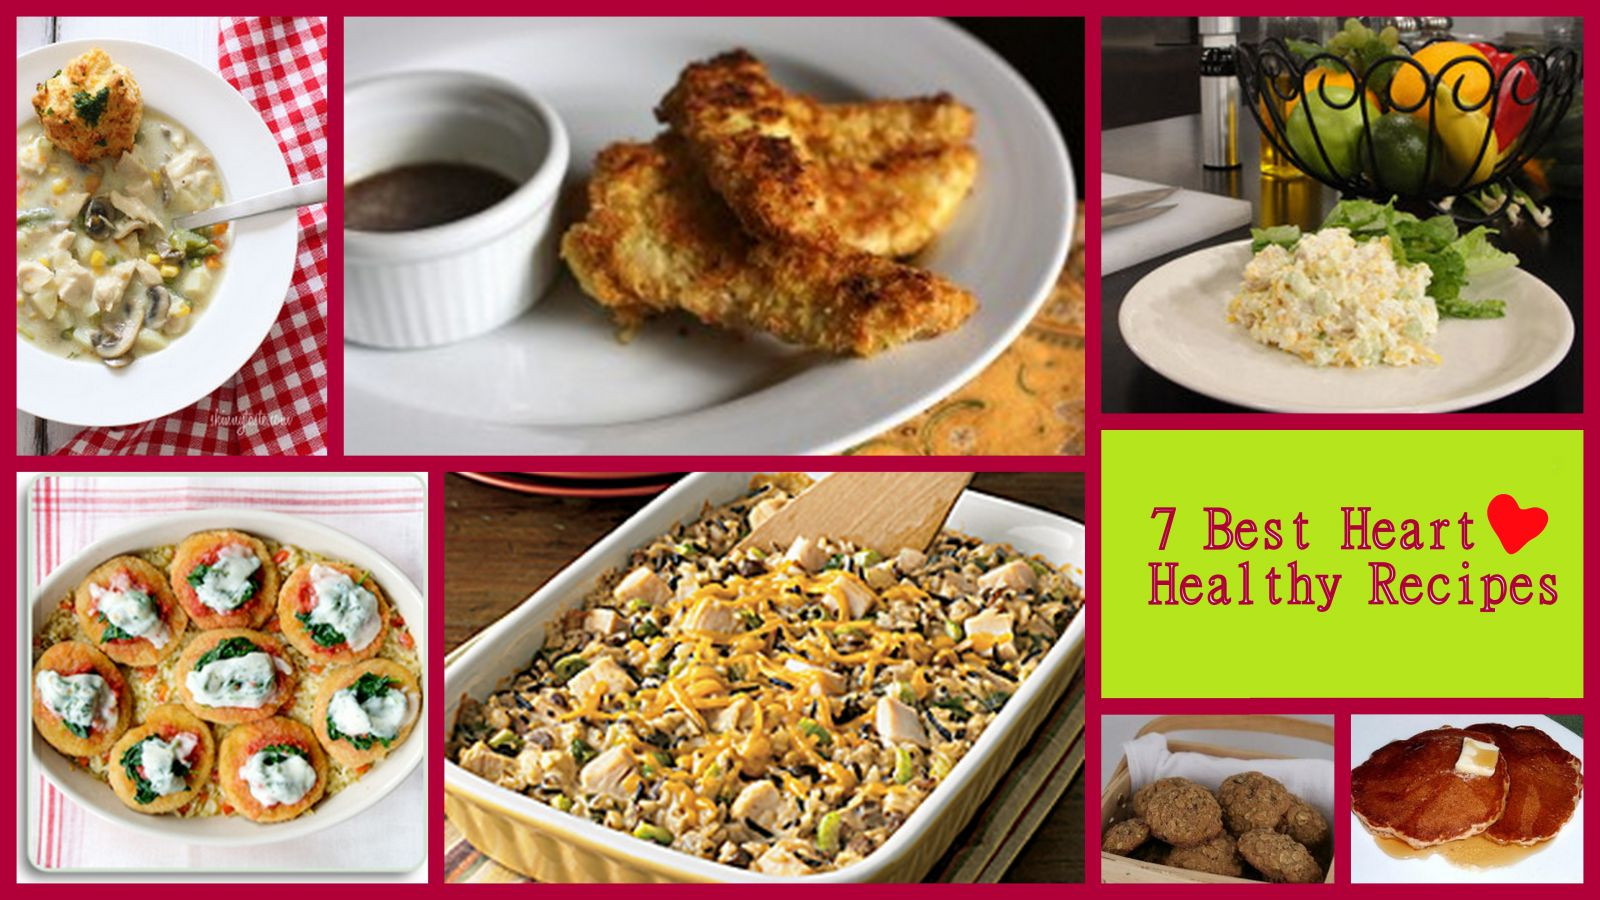 Recipes For Heart Healthy Meals
 7 Best Heart Healthy Recipes